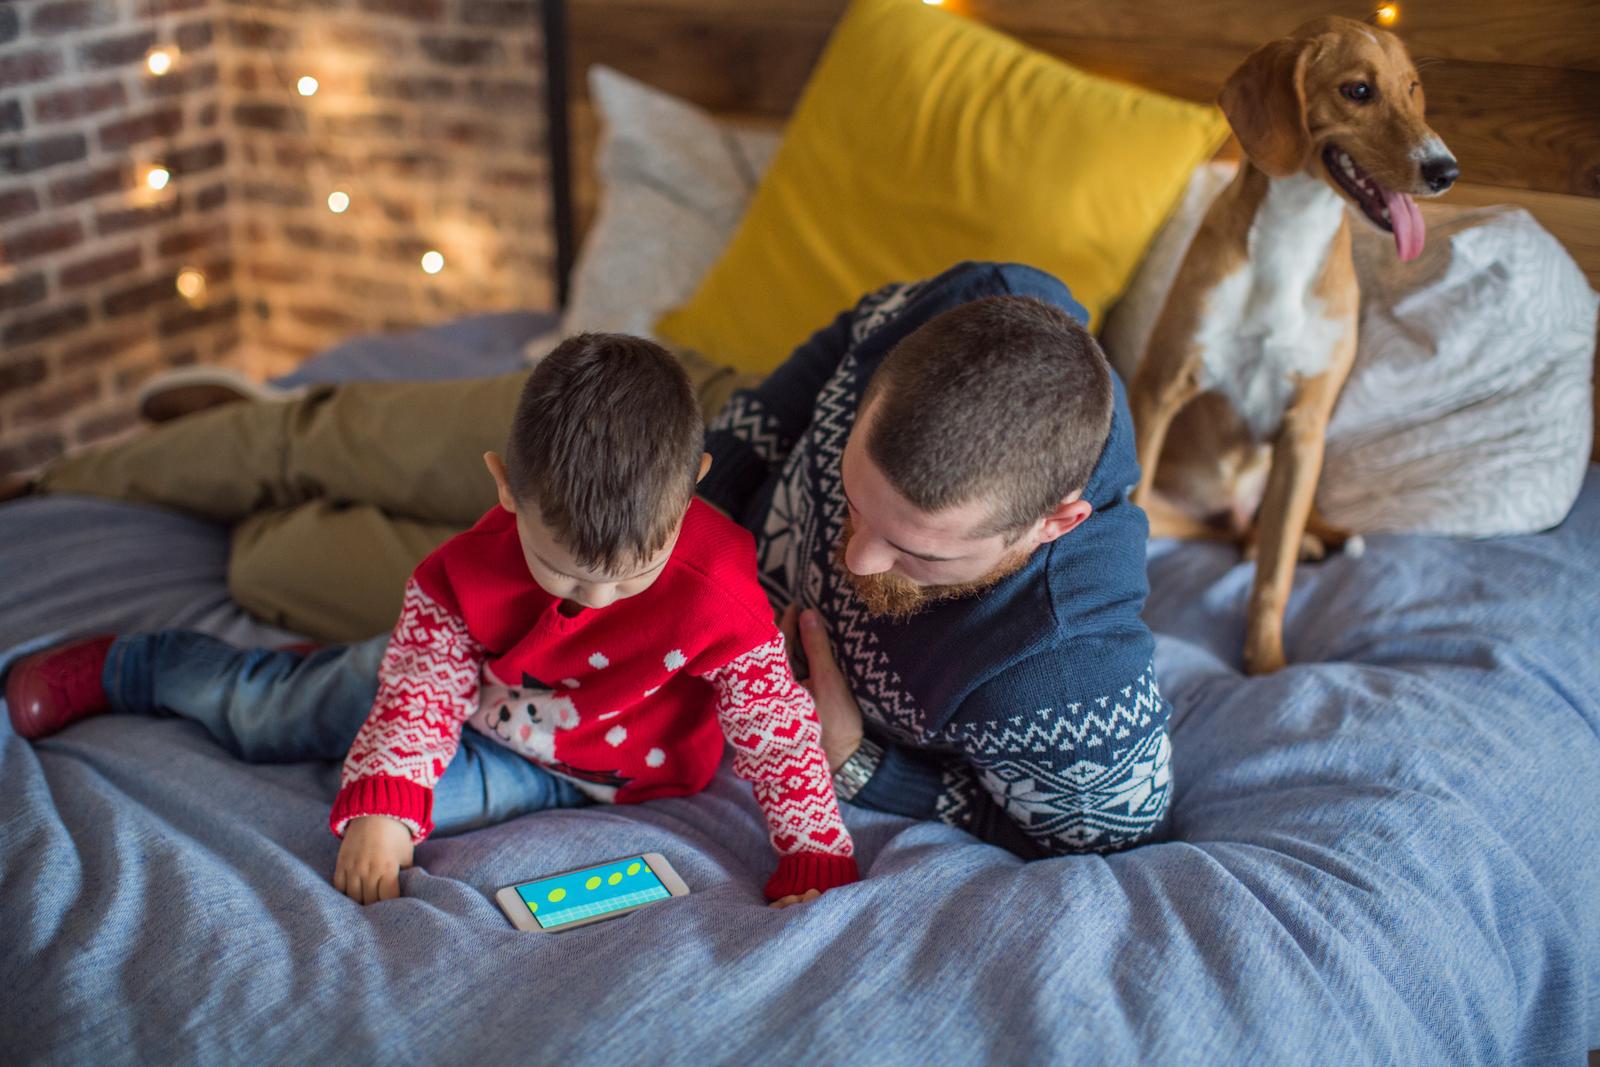 A young boy, his father, and their family dog, look at a phone together during the winter season.